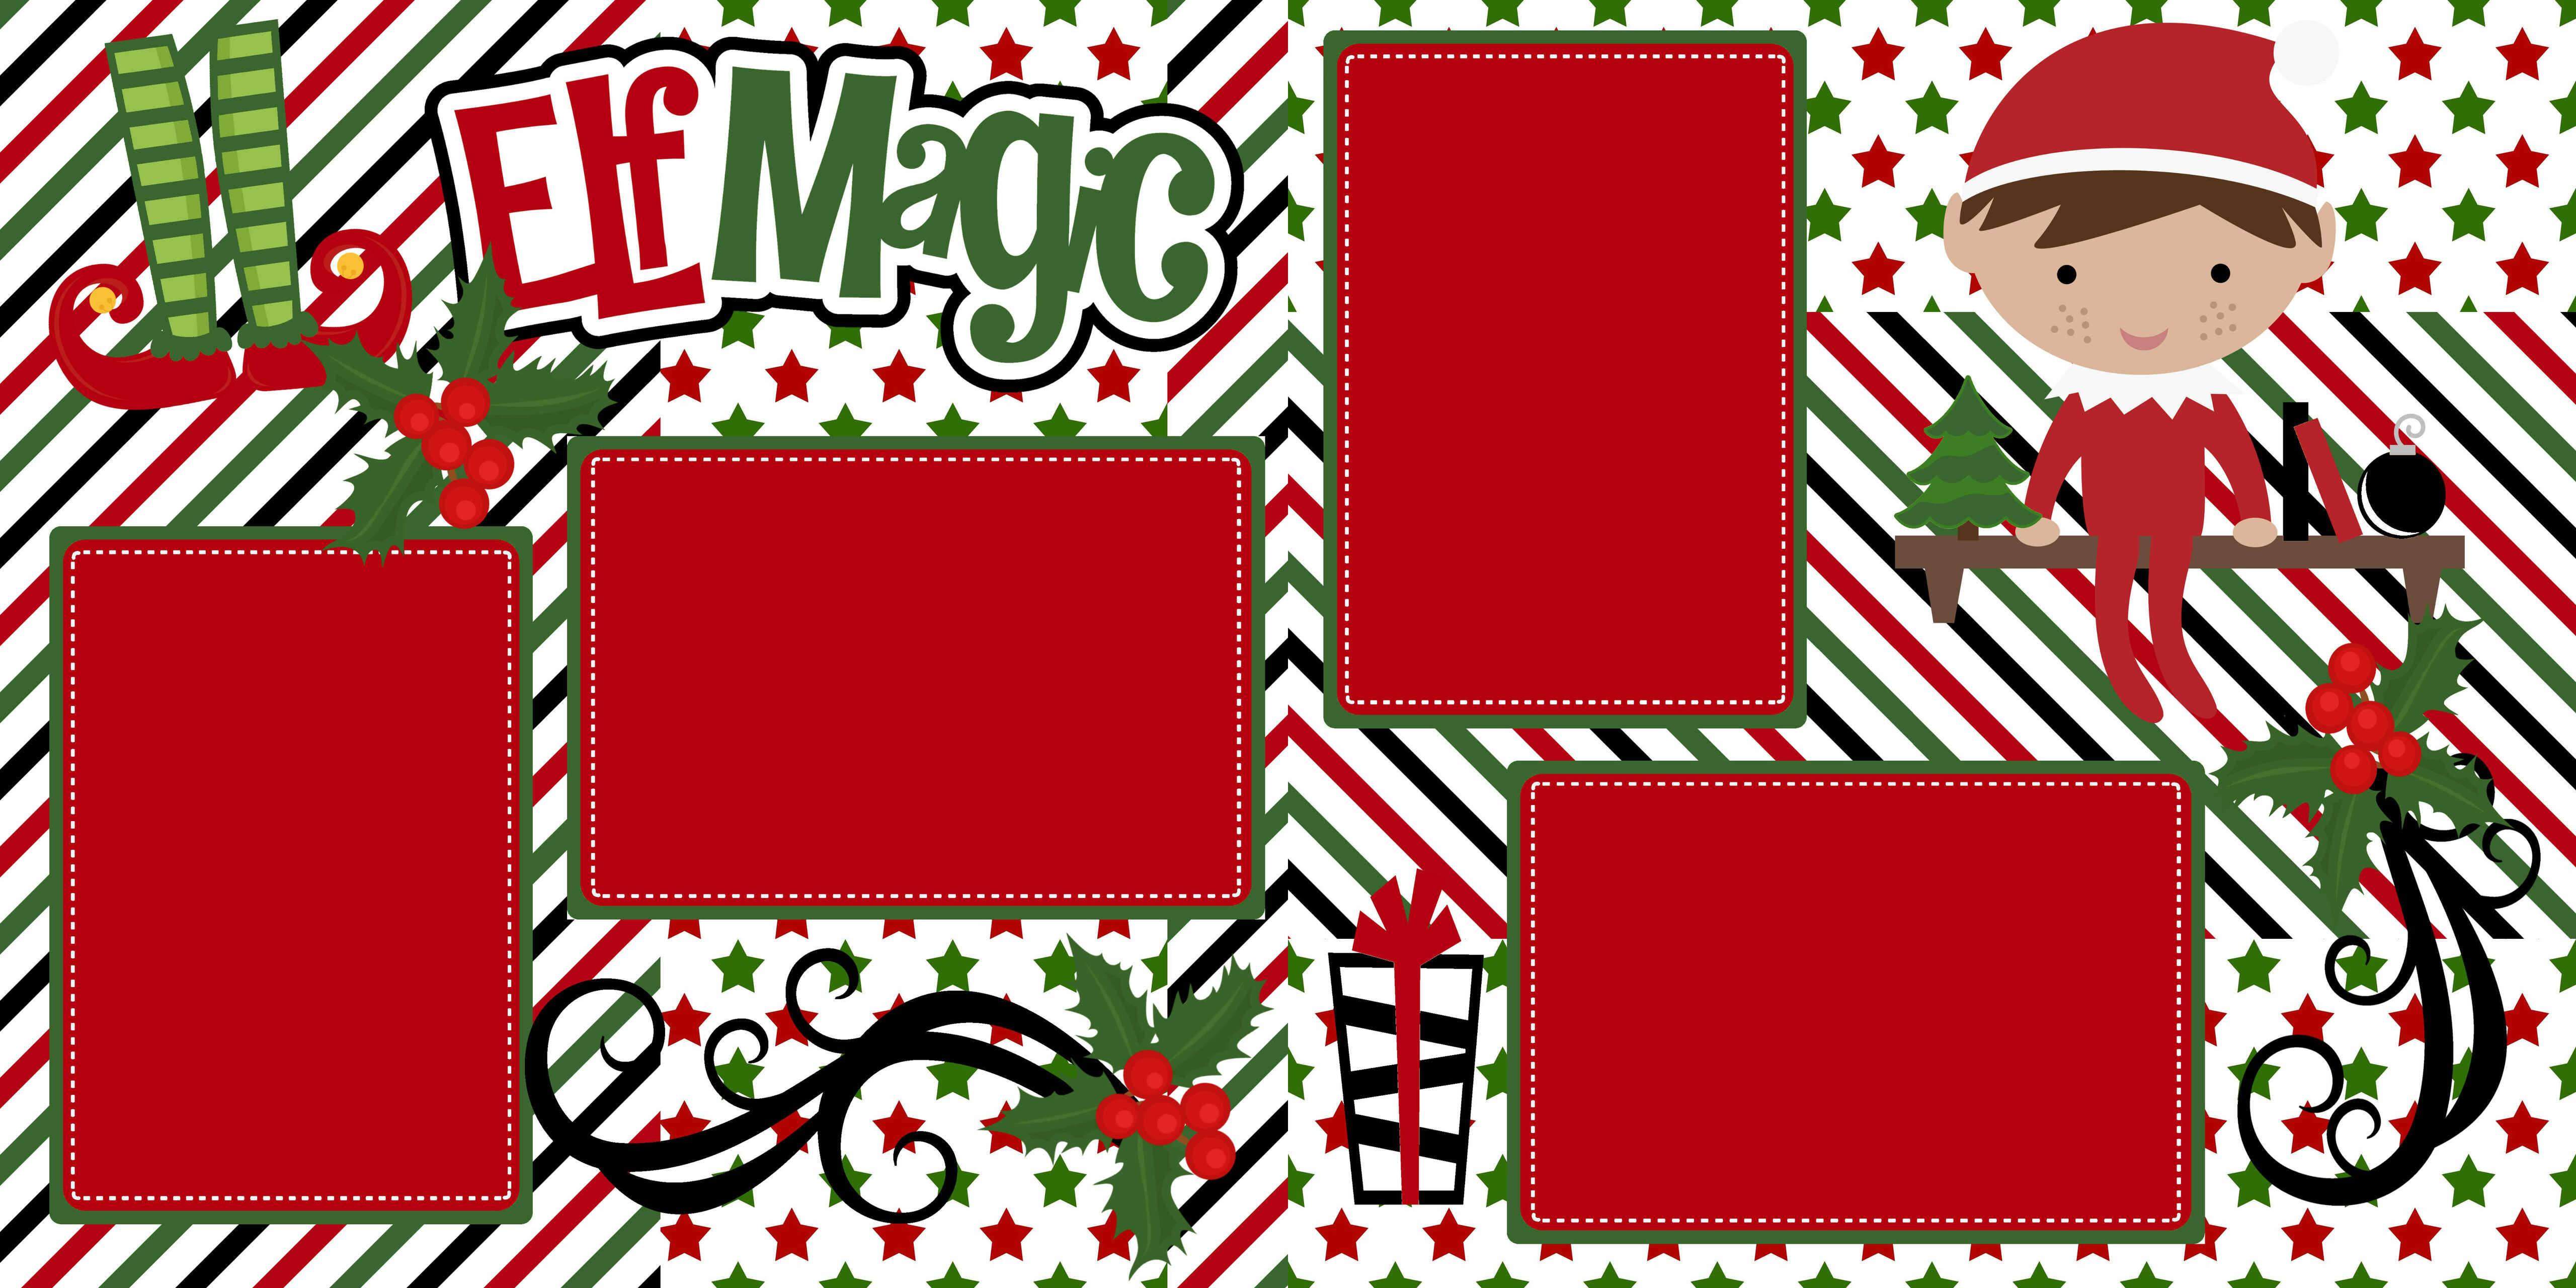 Elf Magic Christmas (2) - 12 x 12 Premade, Printed Scrapbook Pages by SSC Designs